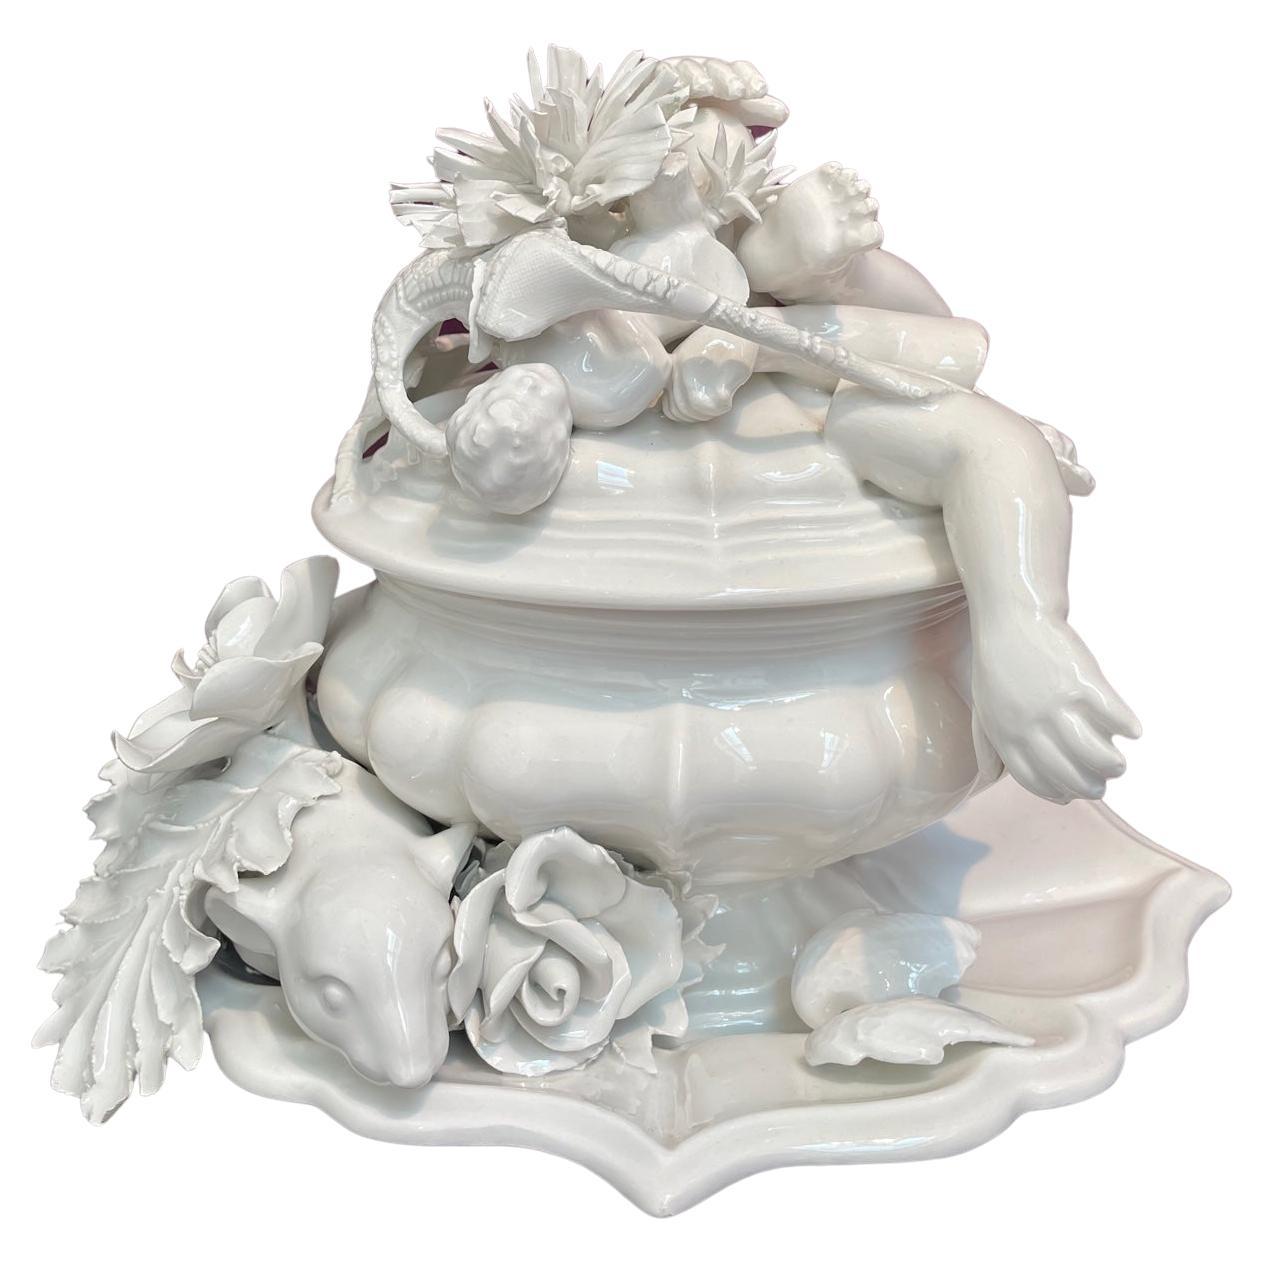 White Ceramic Sculpture by Renzi & Reale Glazed Earthenware Italy Contemporary